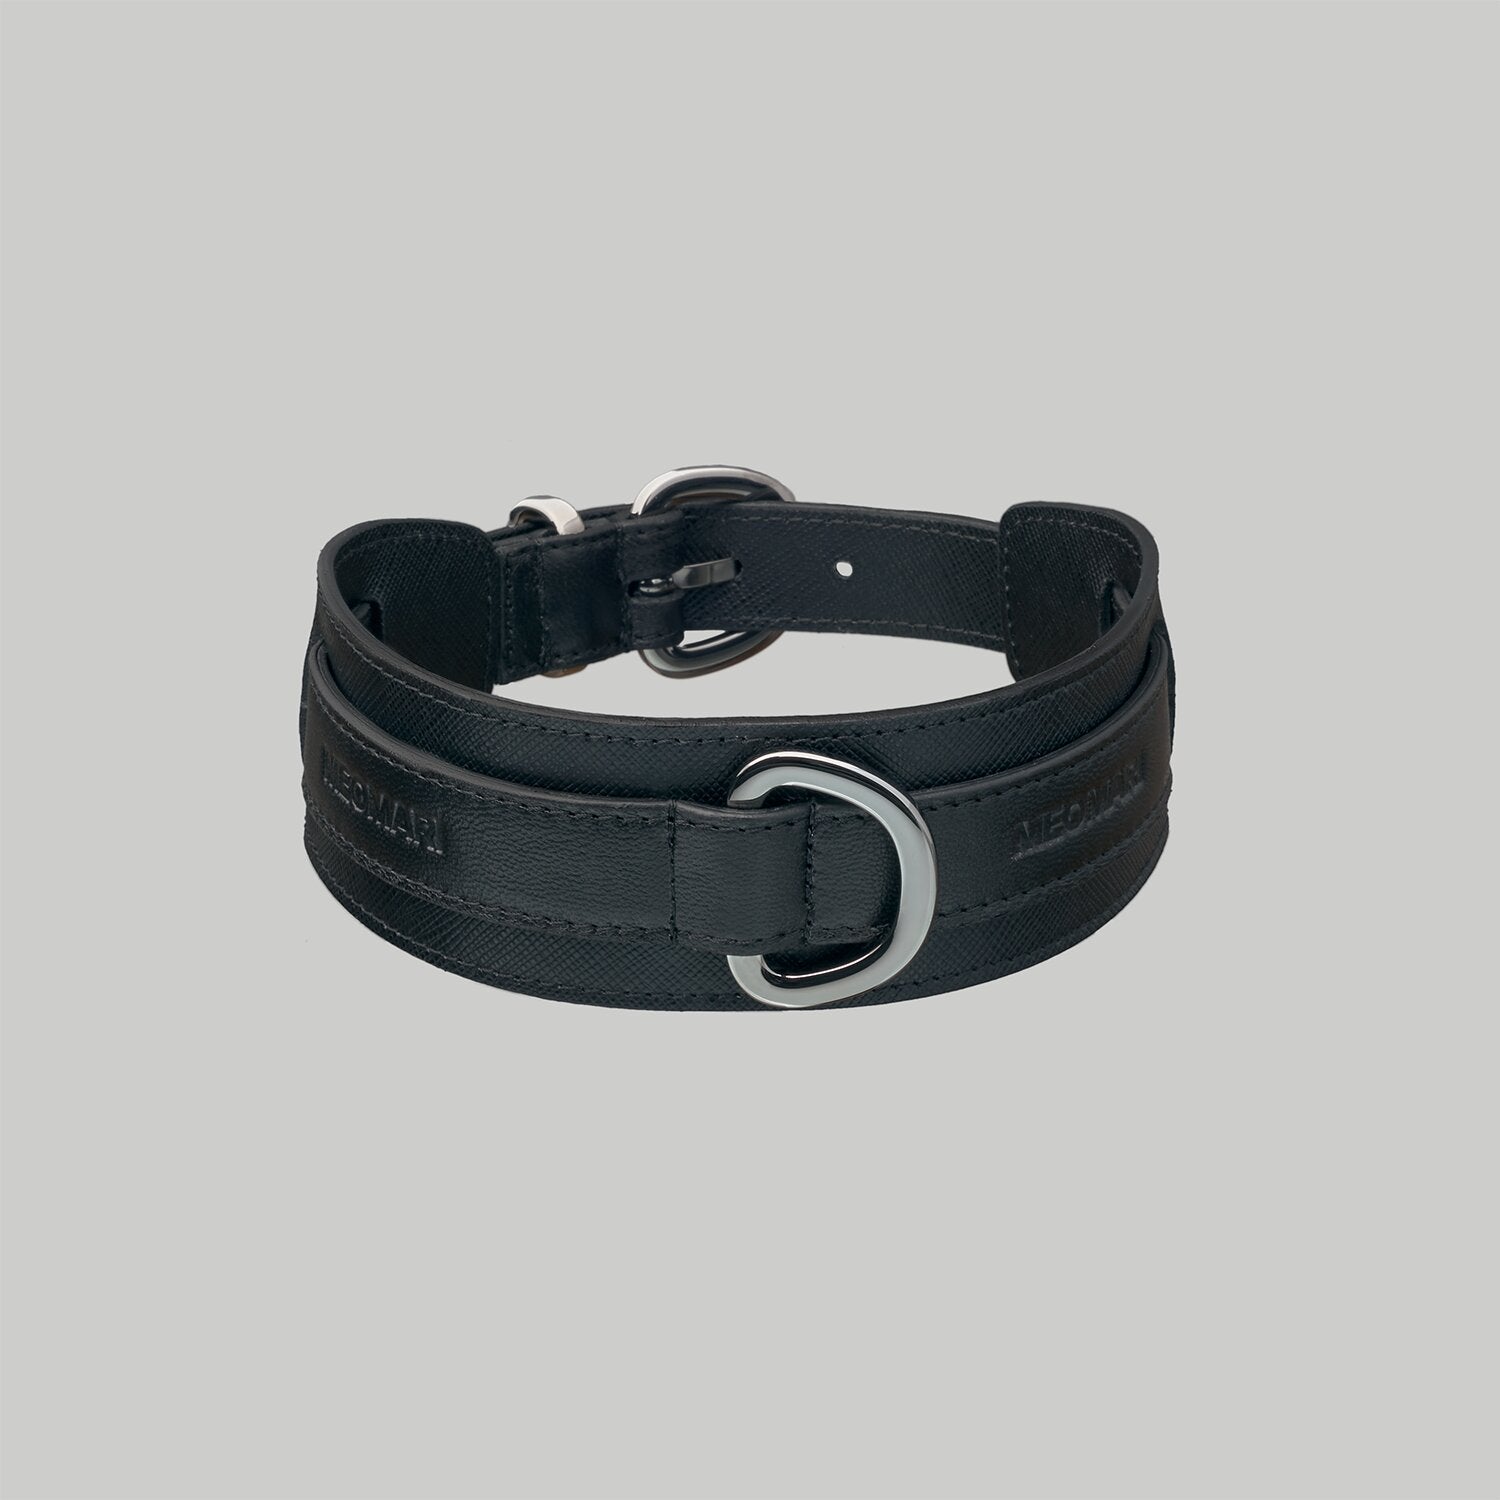 Dog collar in black Saffiano leather with Ruthenium